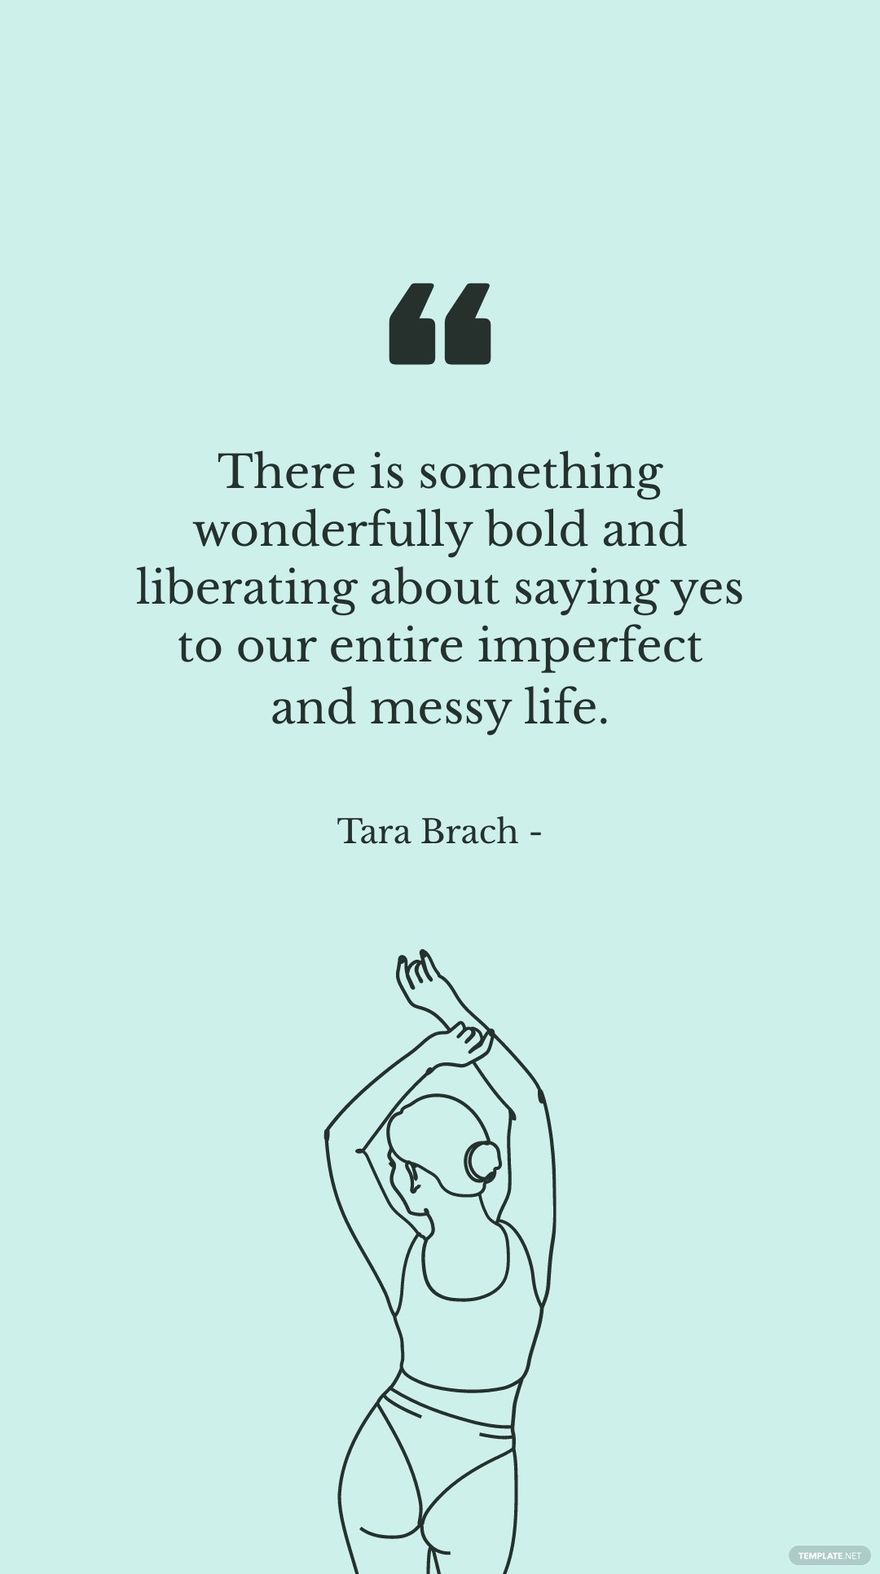 Tara Brach - There is something wonderfully bold and liberating about saying yes to our entire imperfect and messy life.